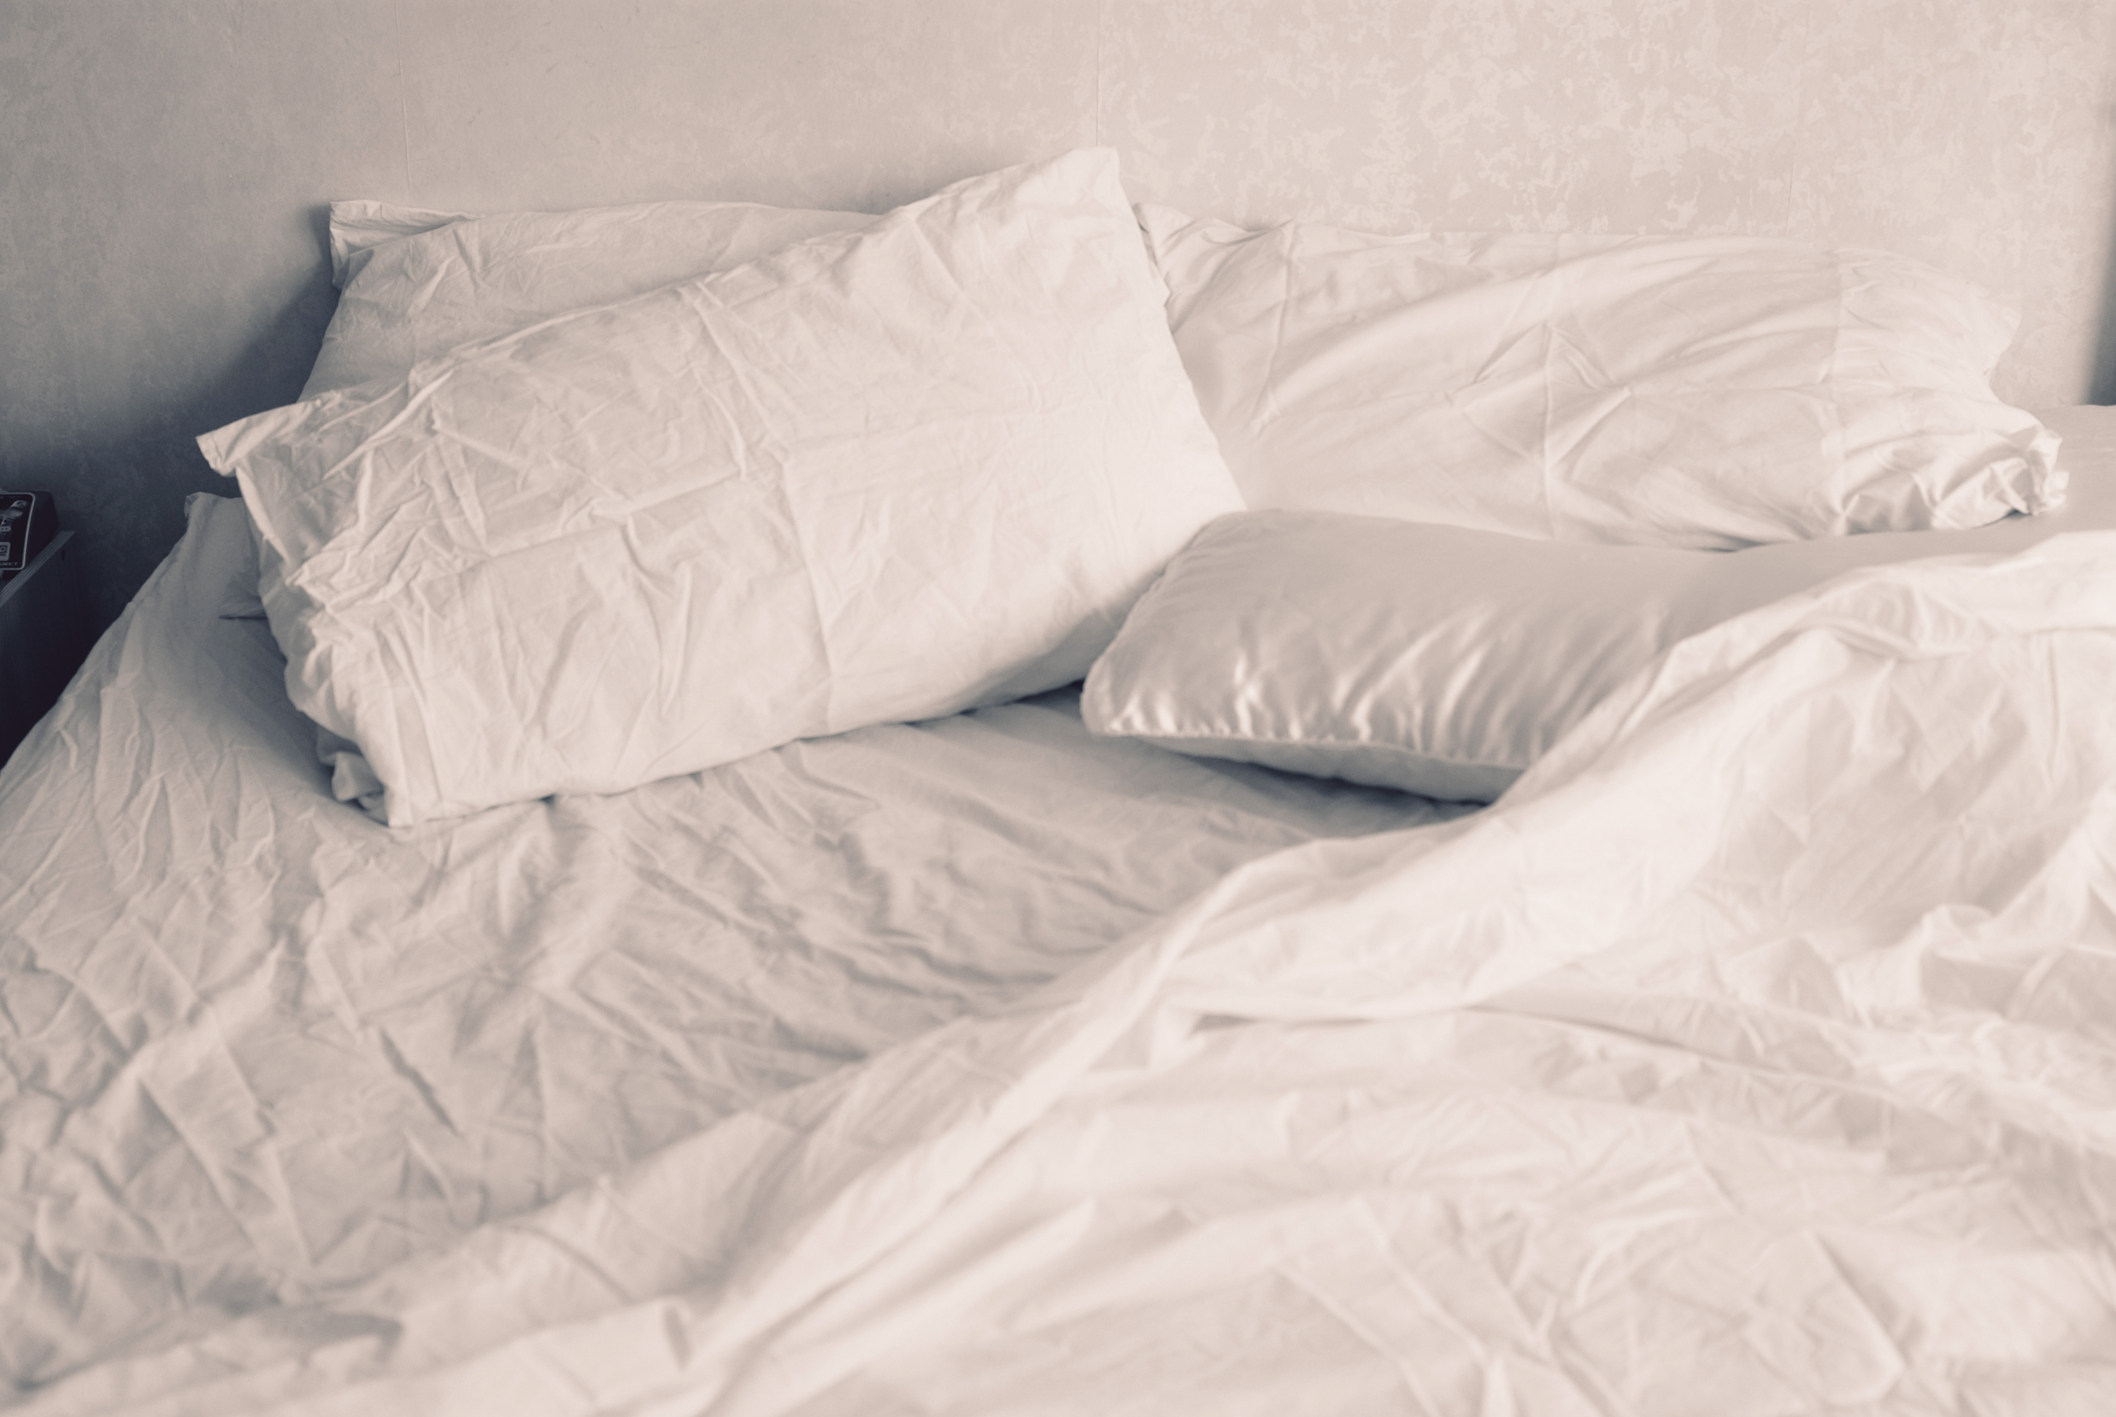 White linen of an unmade bed, empty